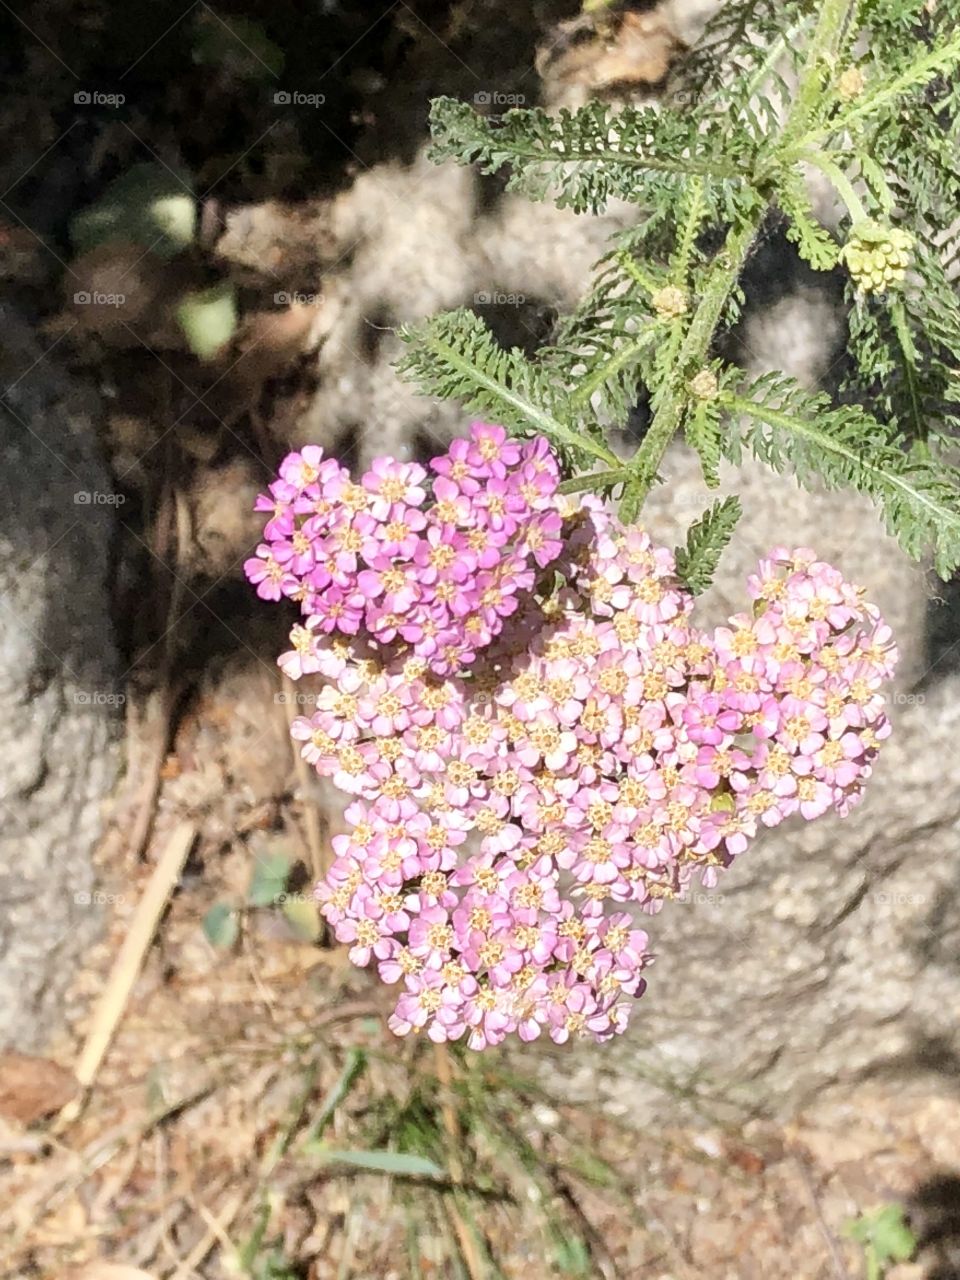 Love from a flower 